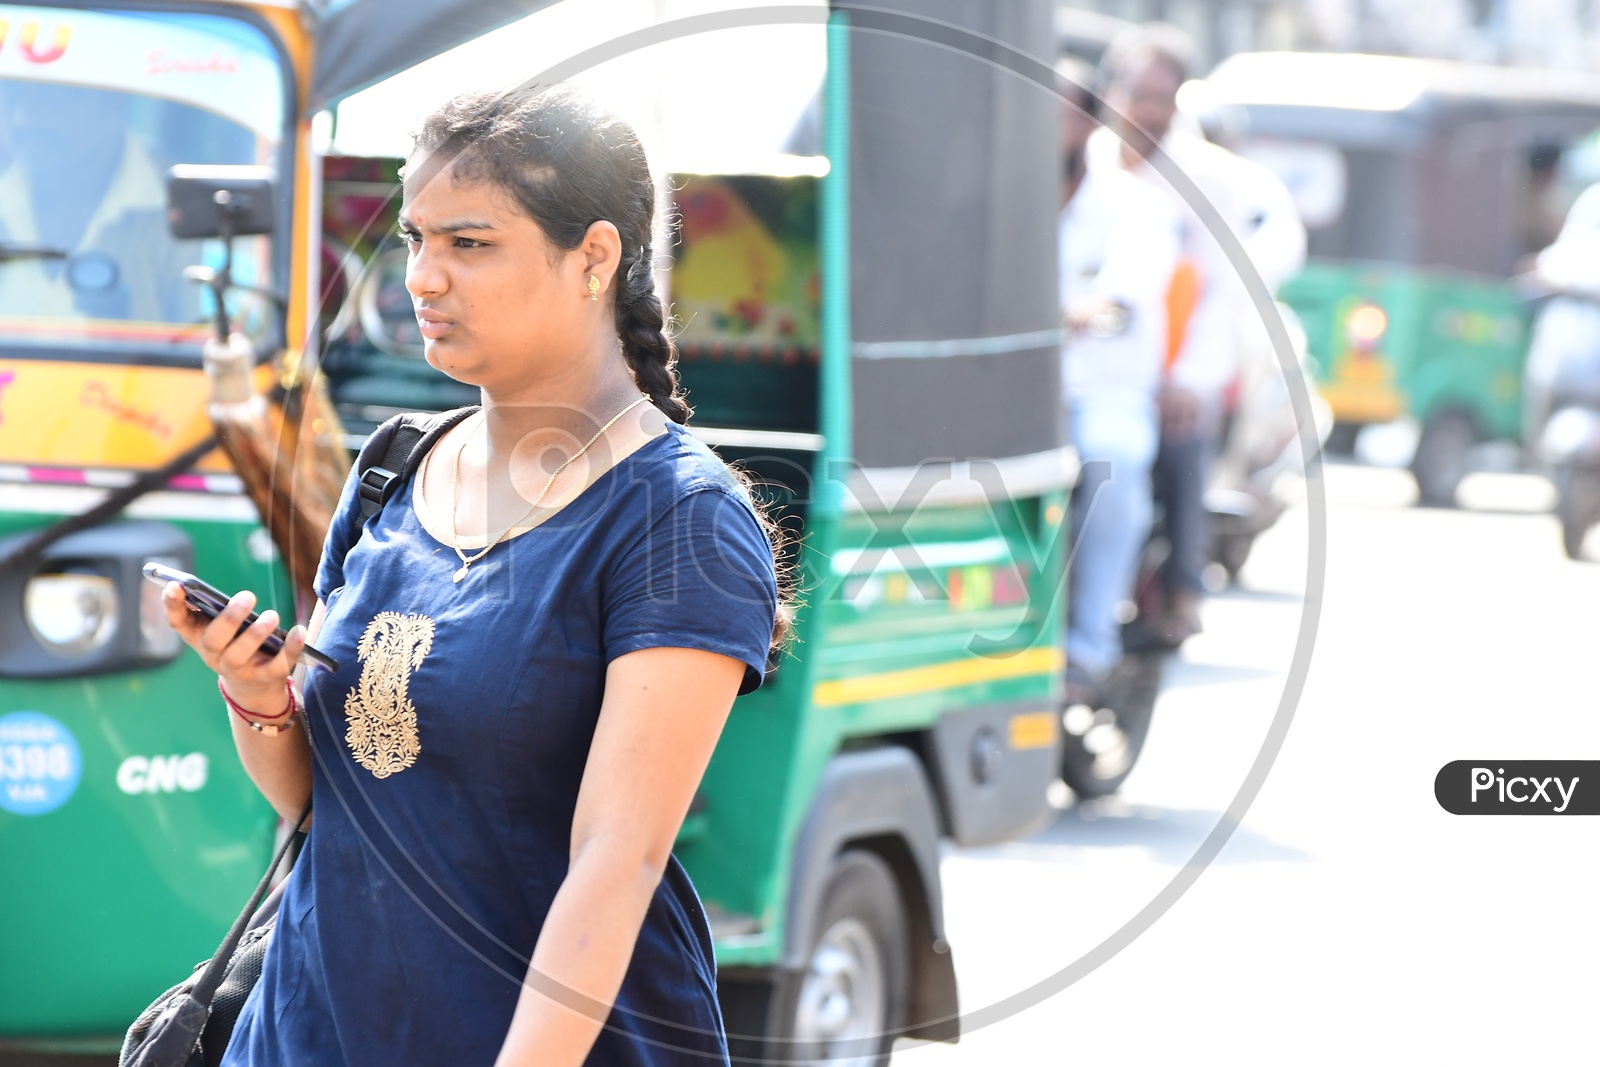 Indian girl walking holding a cellphone